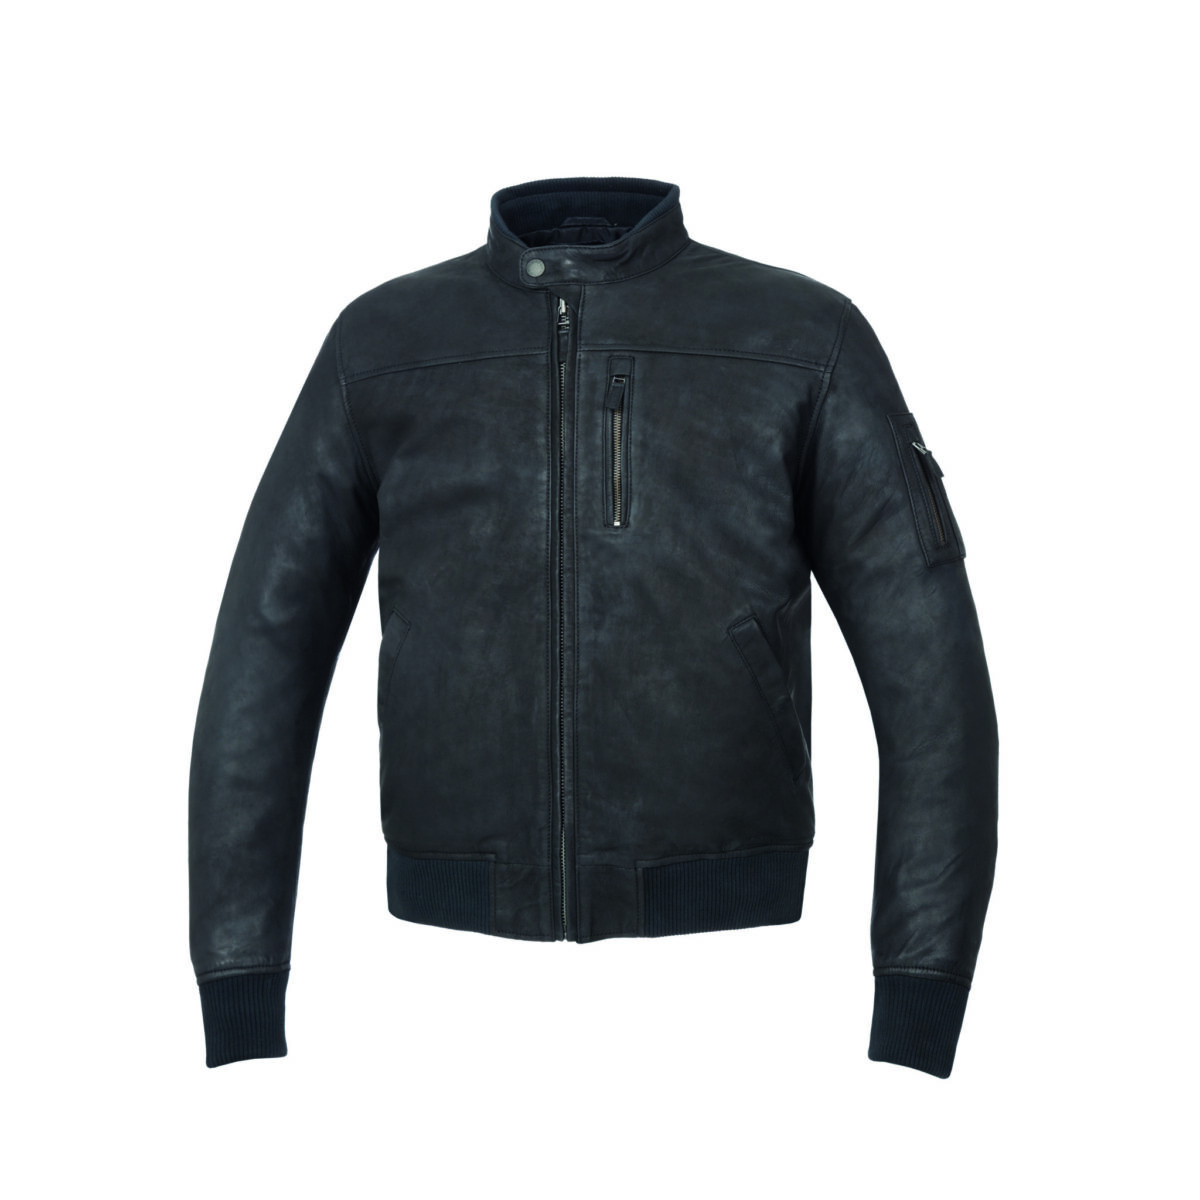 New range of leather jackets from Tucano Urbano for Spring/Summer